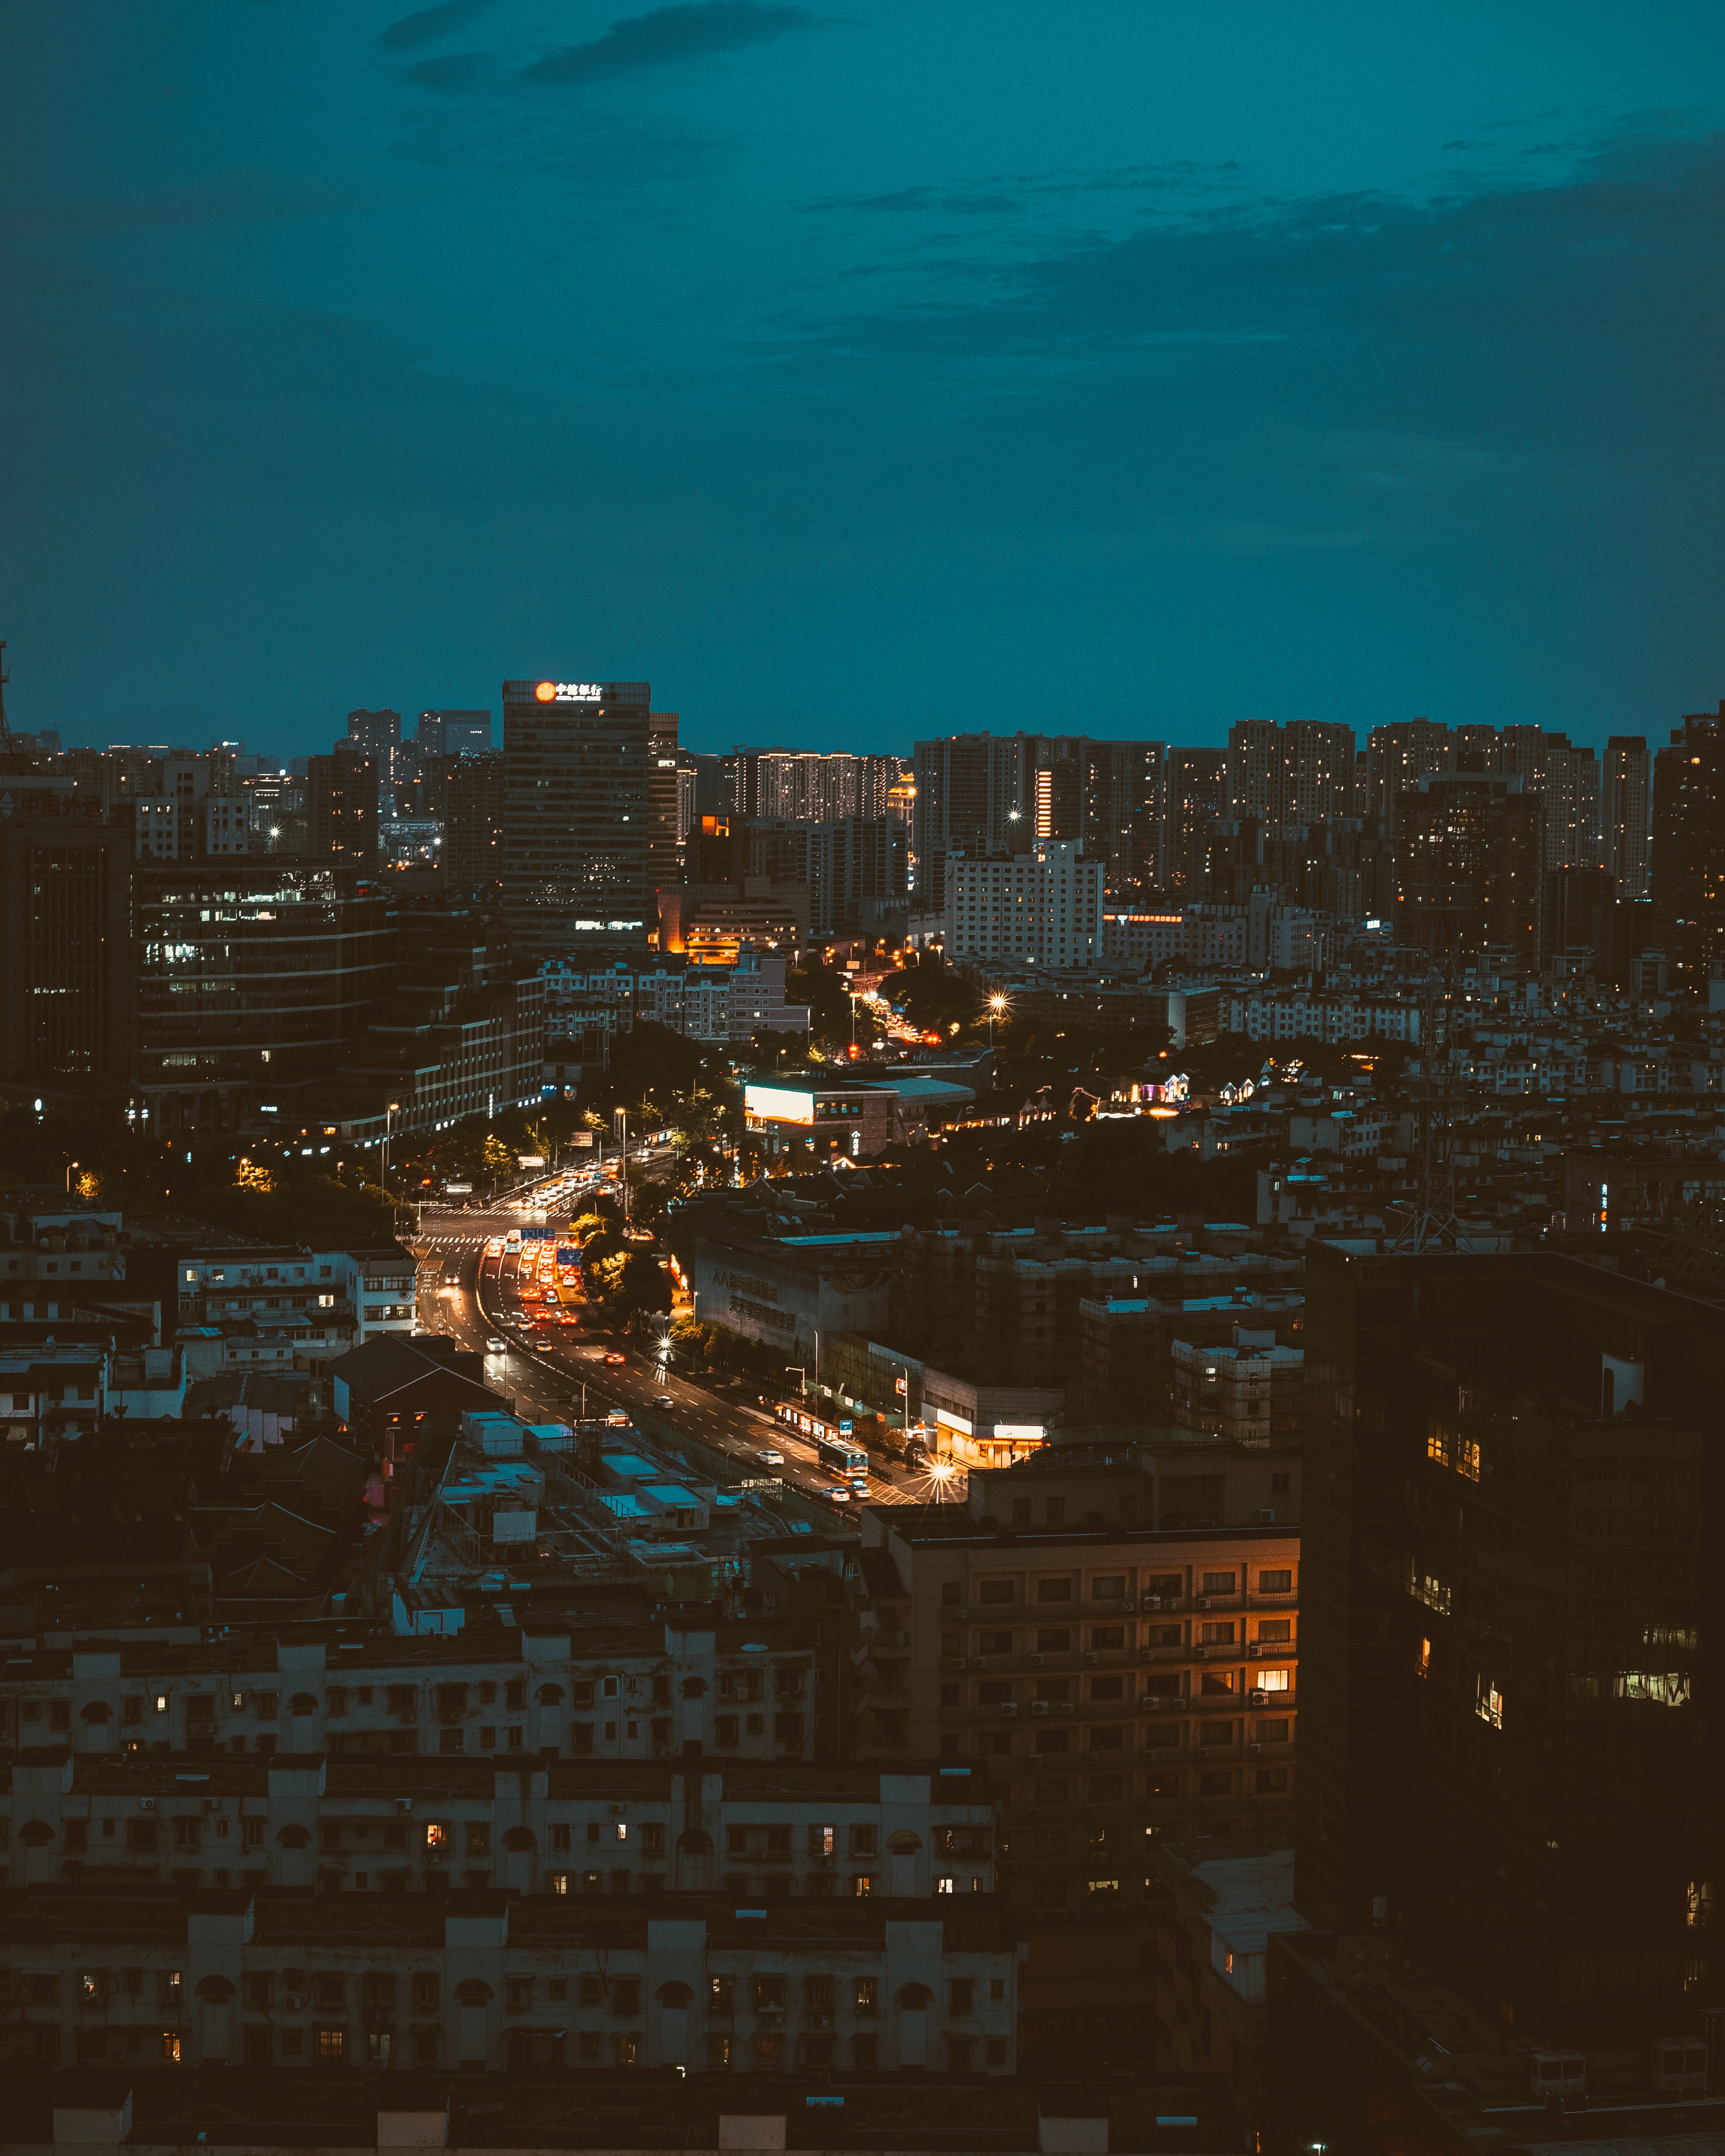 Wallpaper for mobile devices city, building, night city, cities